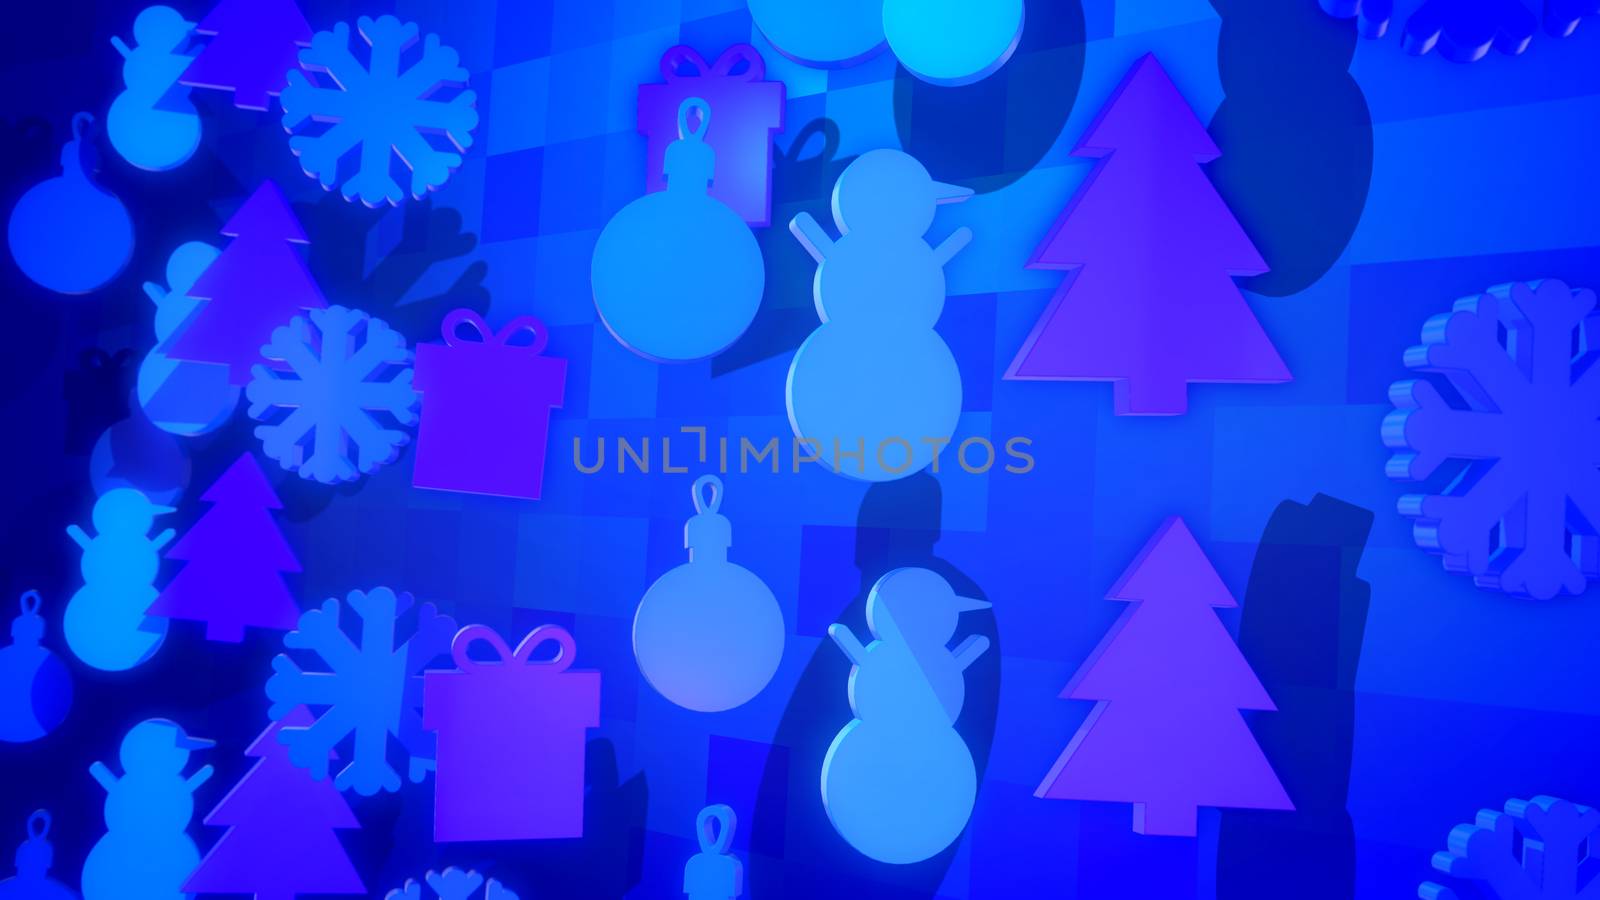 A jolly 3d illustration of Christmas holiday silouettes forming festive and happy mood and showing snowmen, fir trees, gift boxes spinning around in the blue background.